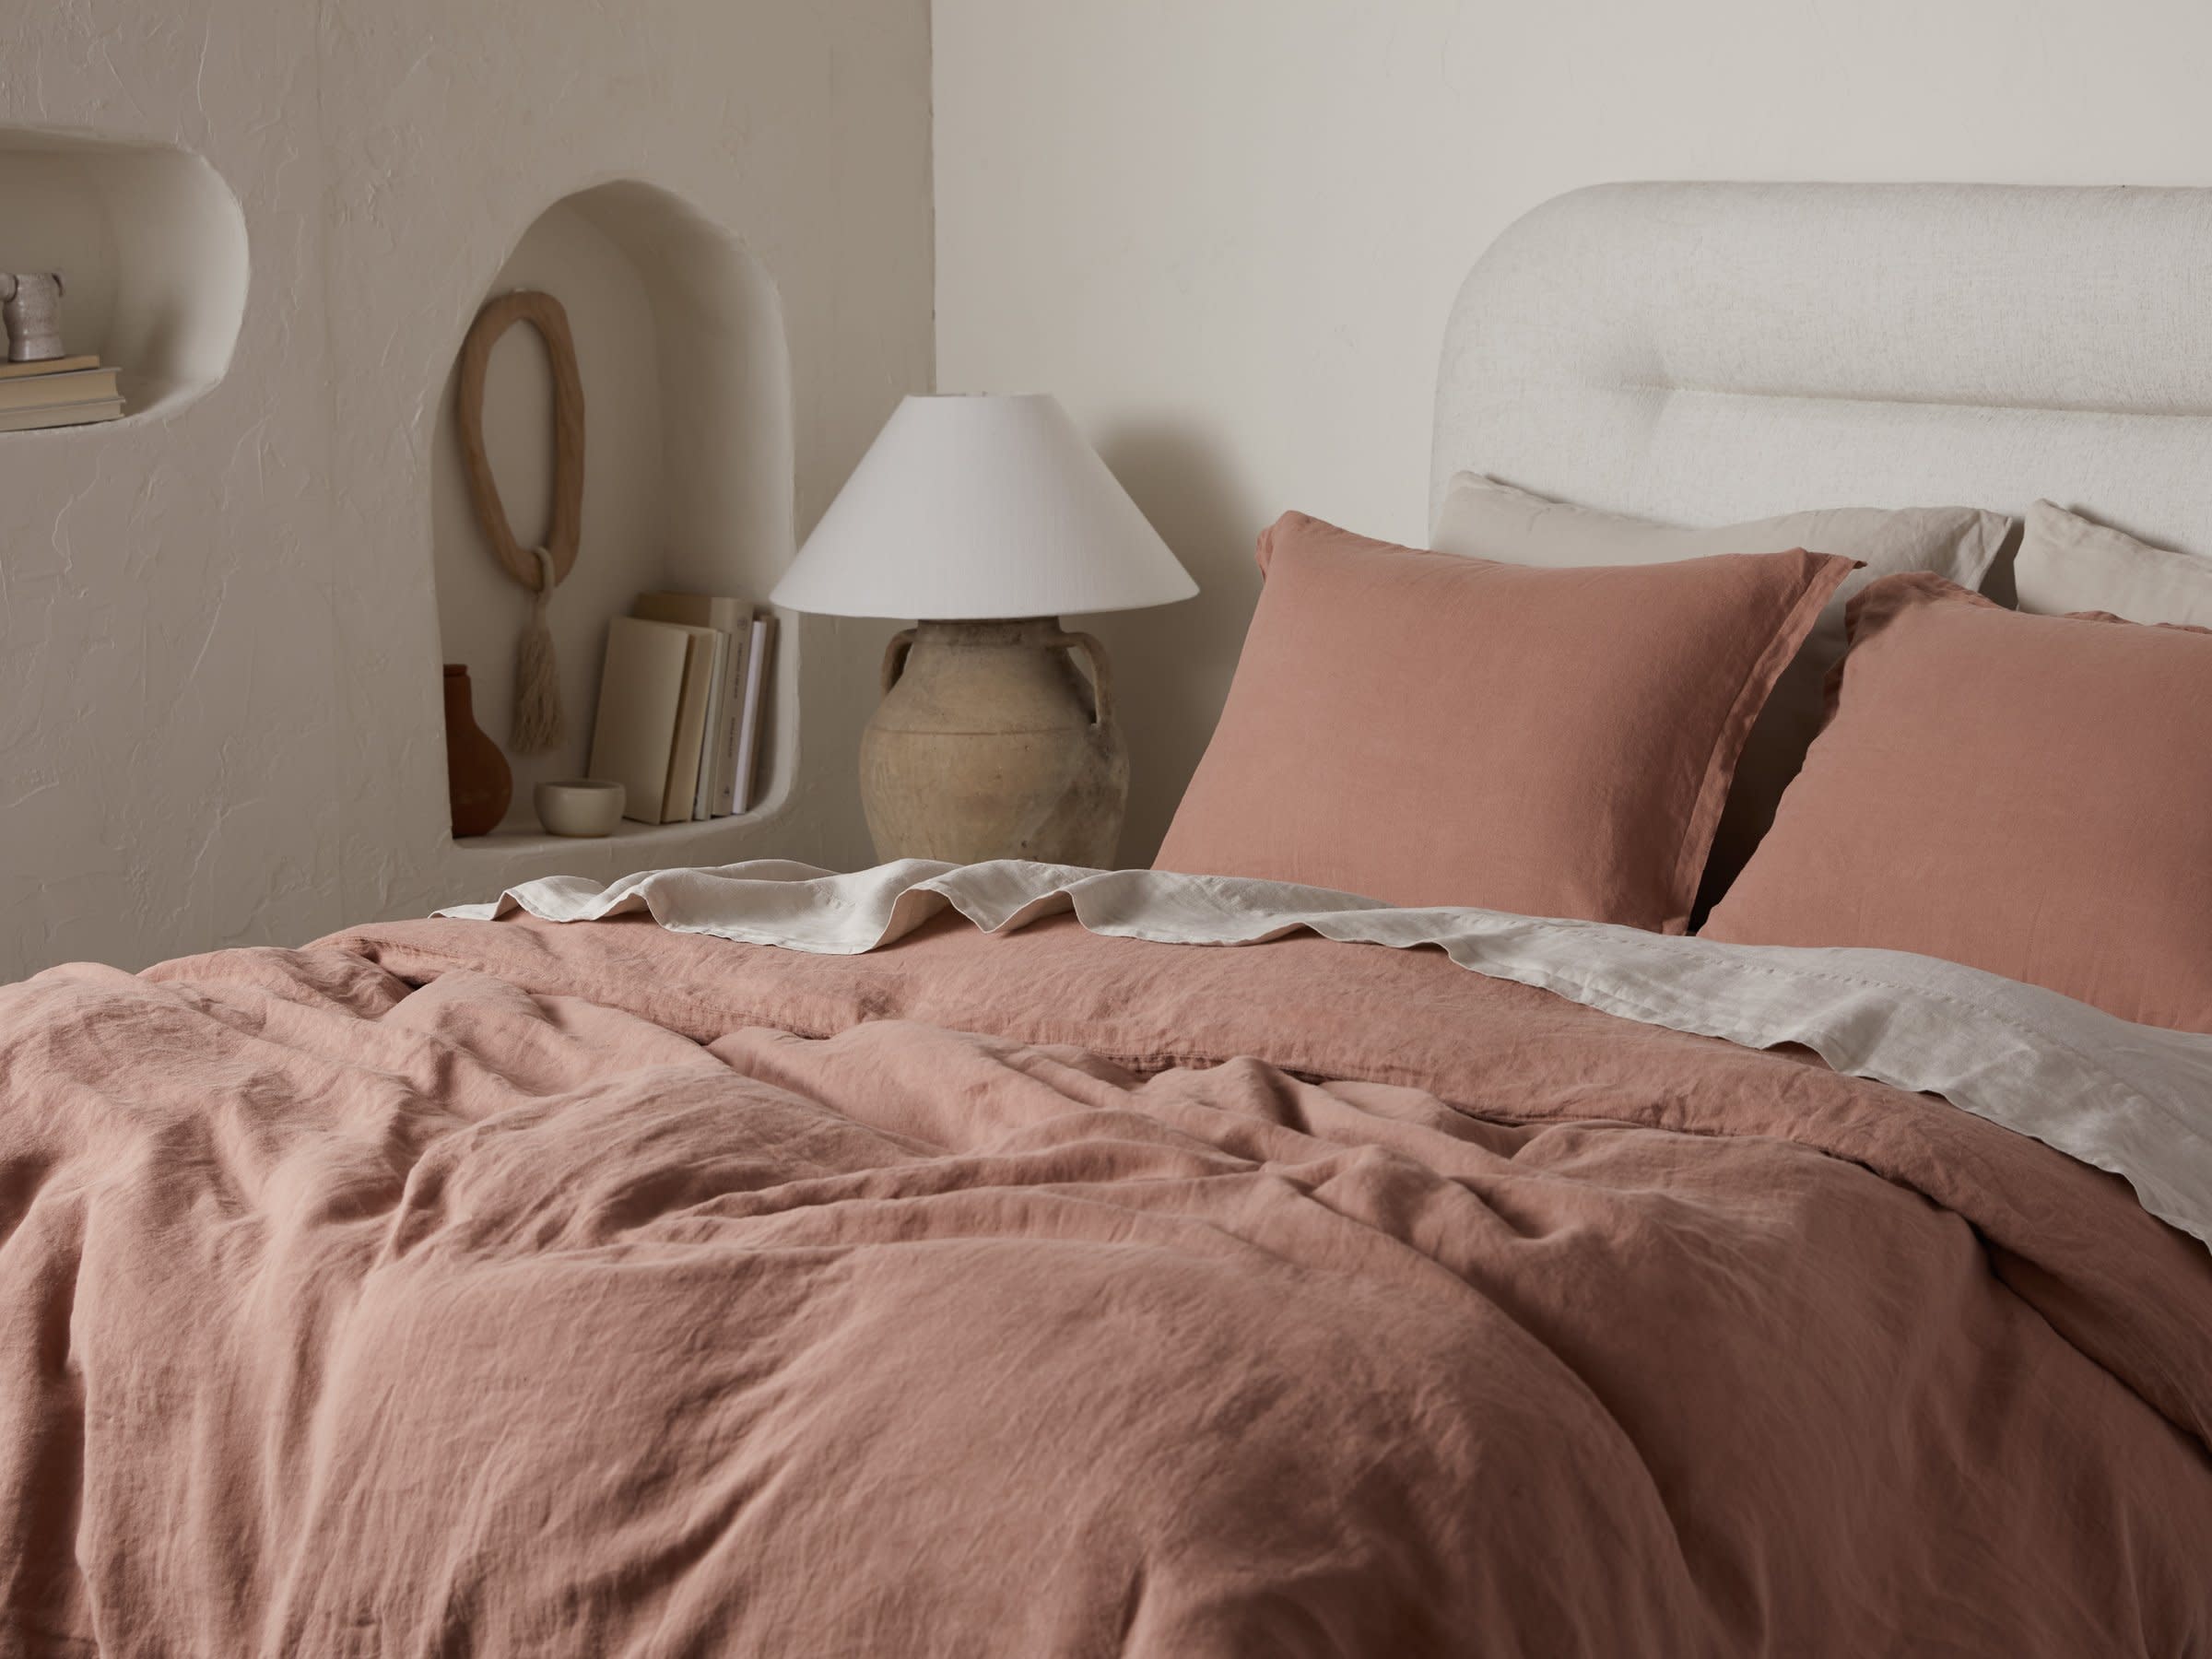 Clay Linen Sham Set Shown In A Room